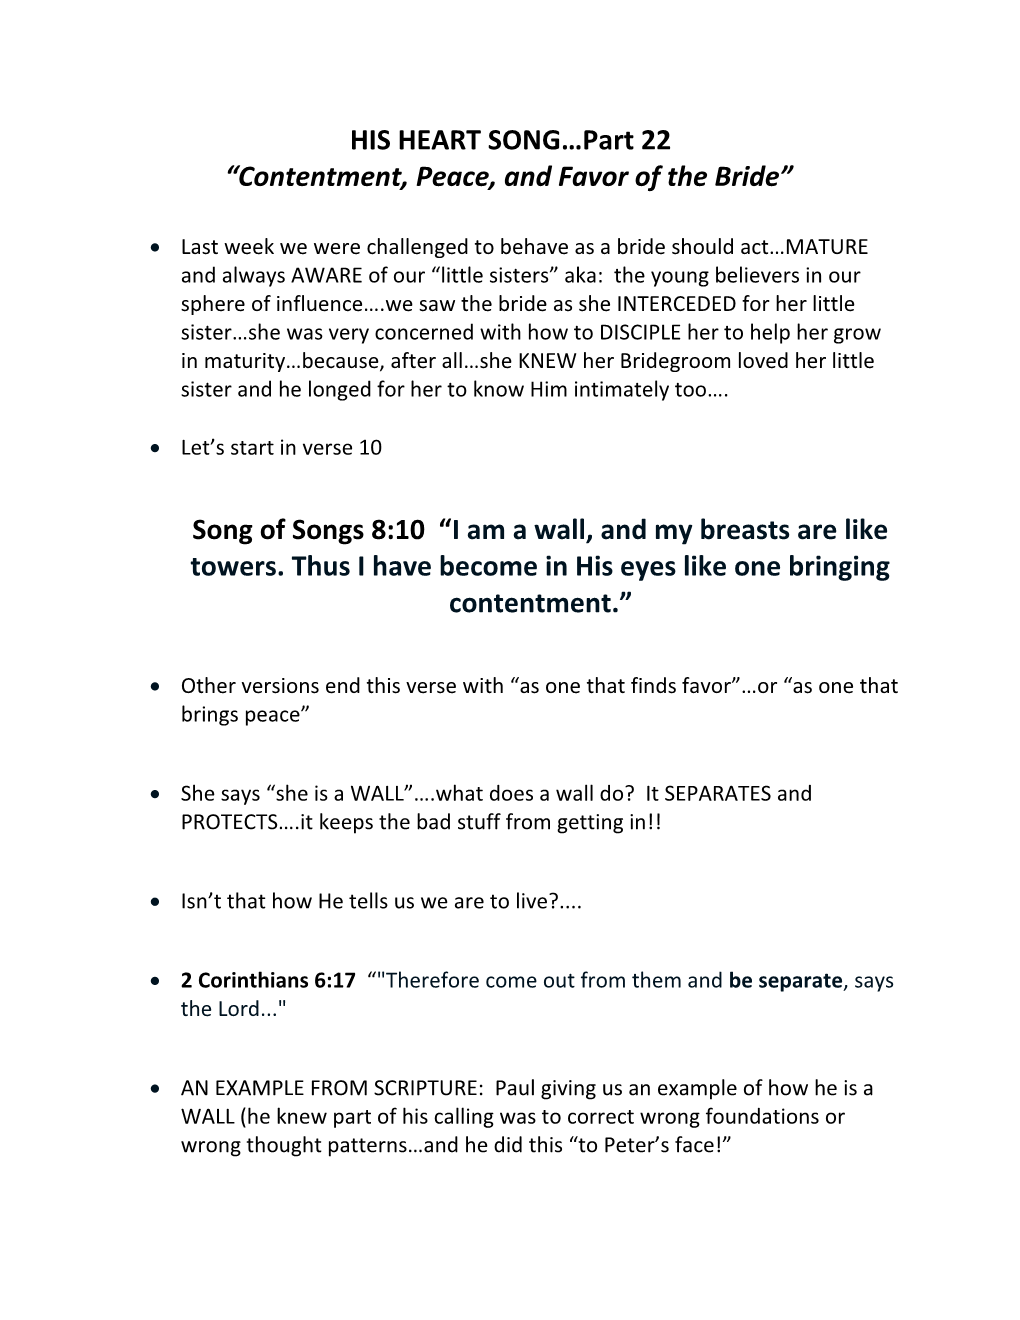 HIS HEART SONG Part 22